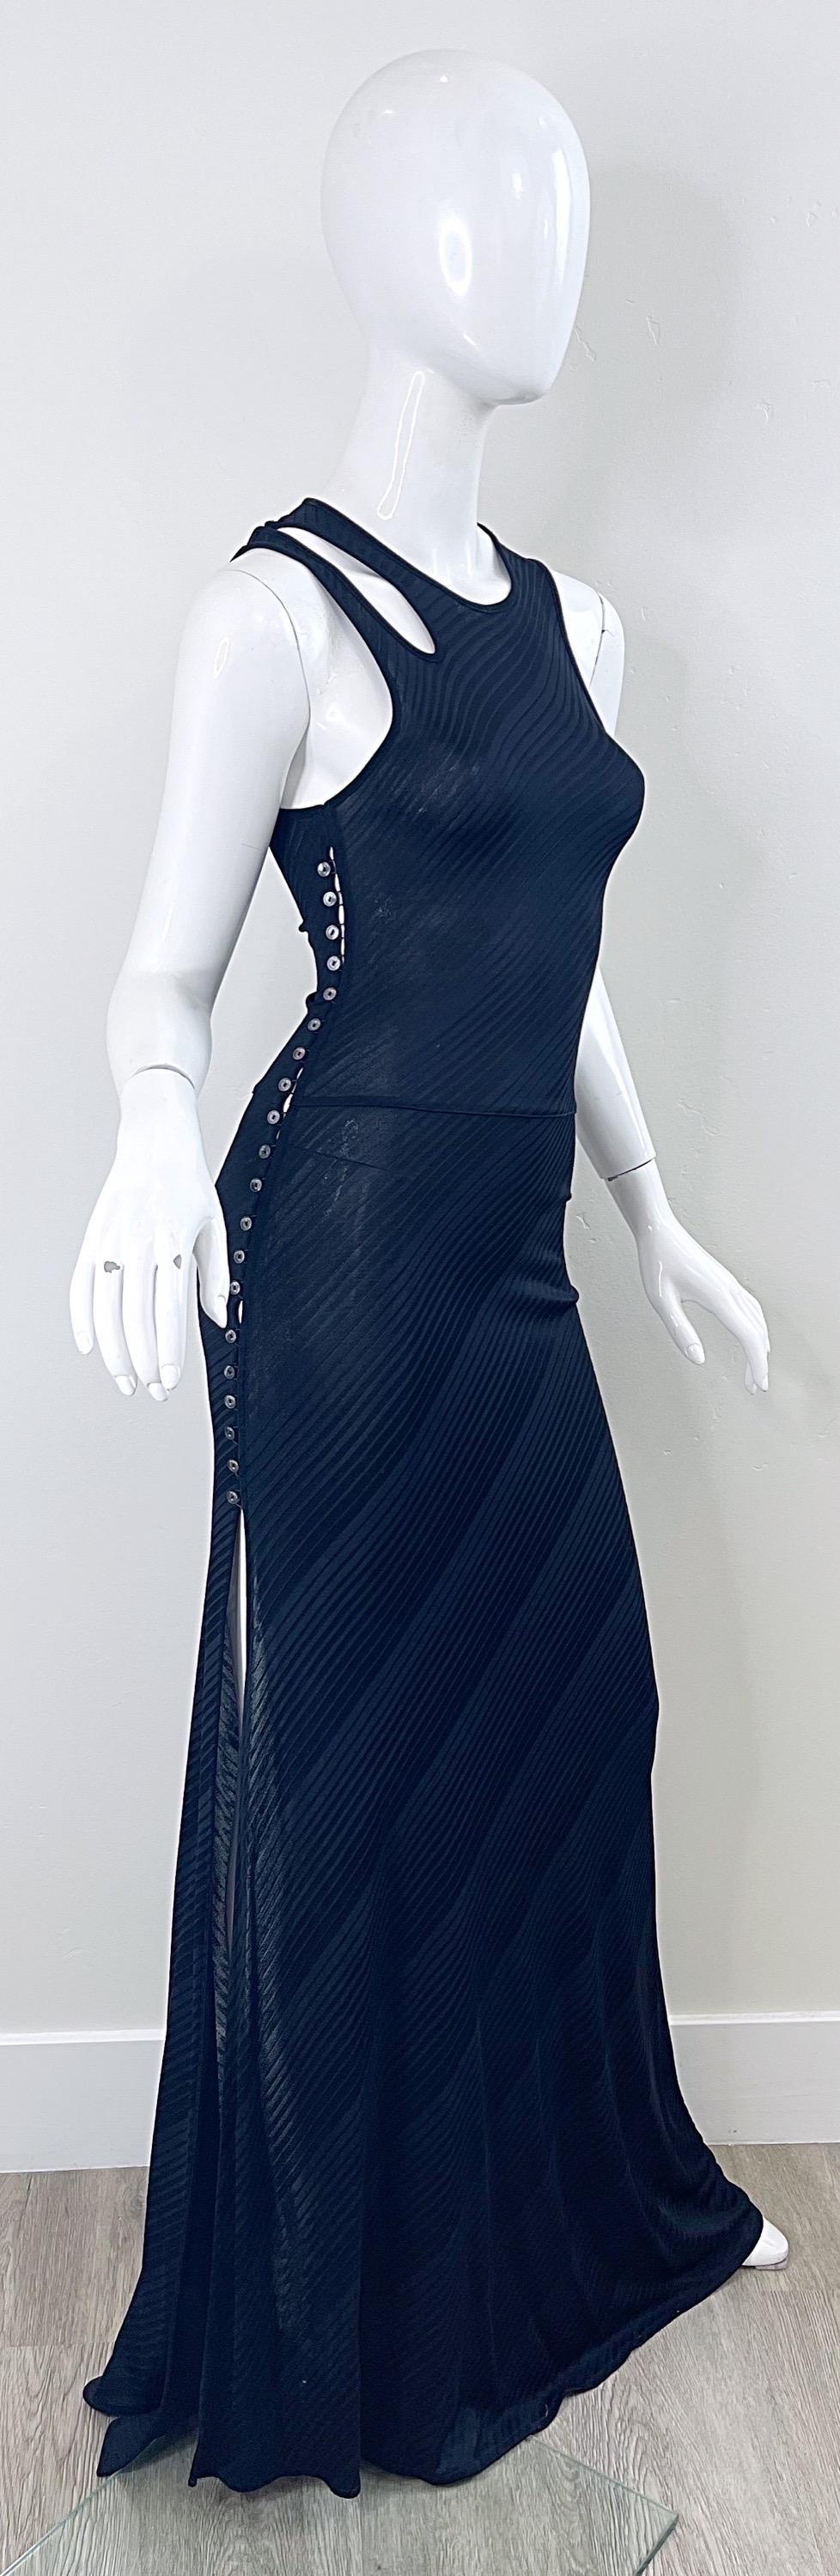 Gianni Versace Versus Spring 2001 Black Cut Out Sleeveless Vintage Jersey Gown  For Sale 11